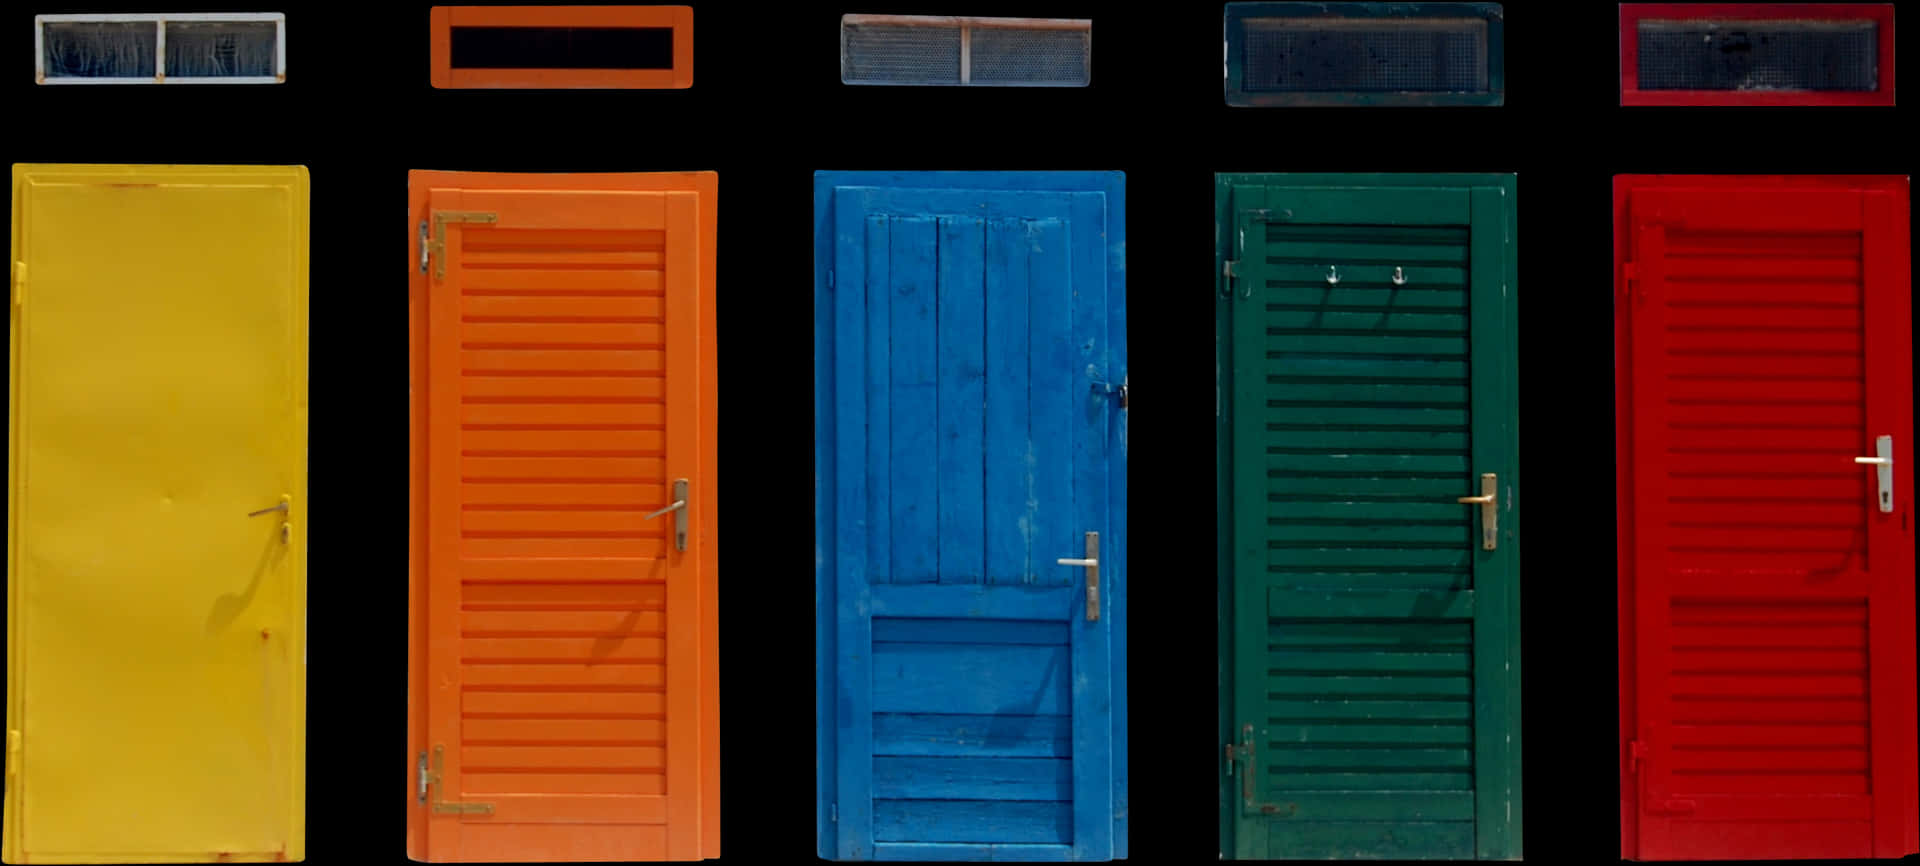 Download Colorful Doors Black Background | Wallpapers.com